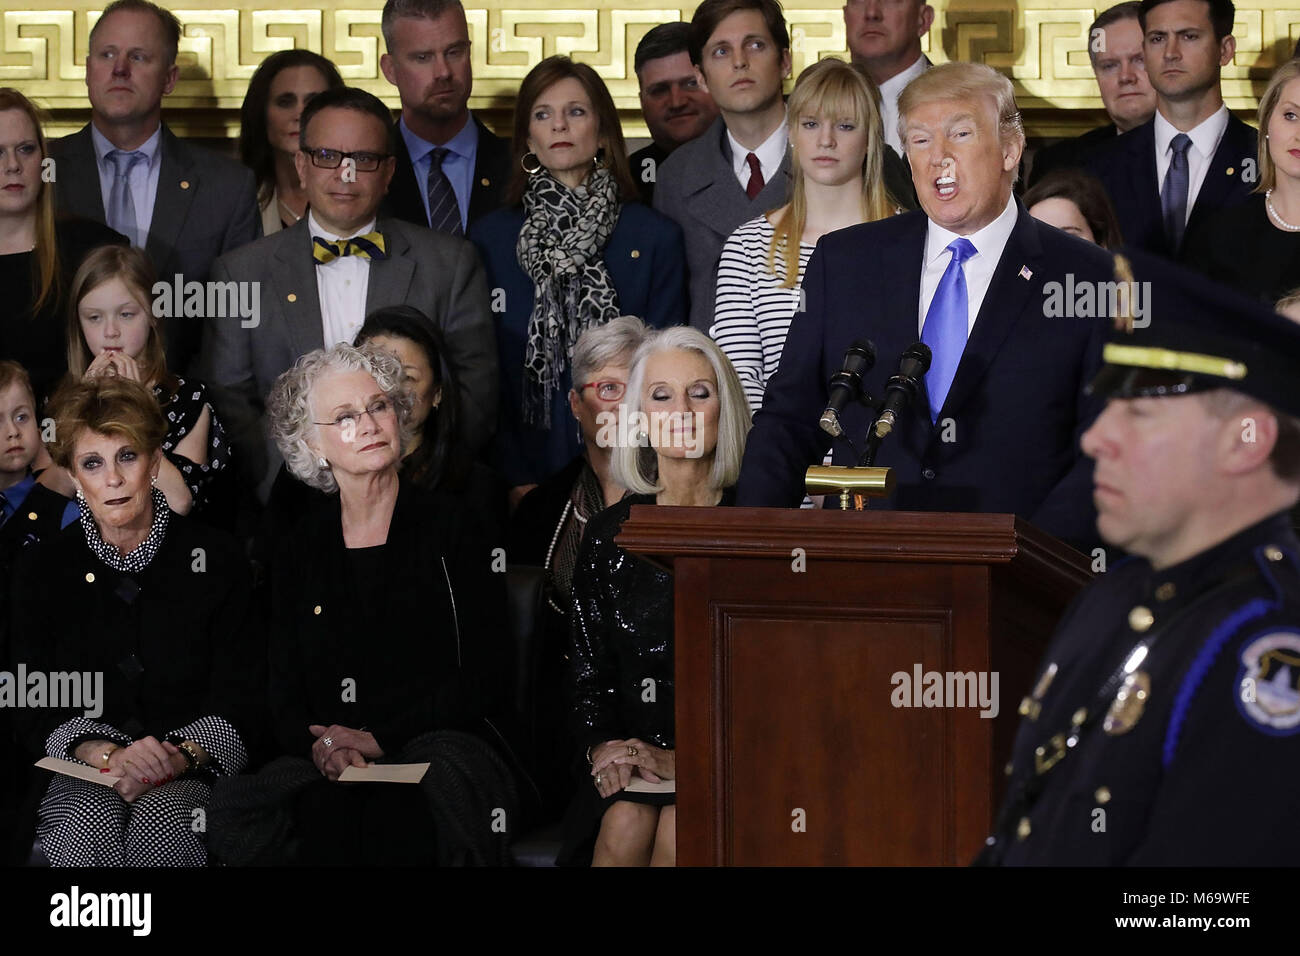 WASHINGTON, DC - FEBRUARY 28: U.S. President Donald Trump (R) delivers remarks during a memorial ceremony for Christian evangelist and Southern Baptist minister Billy Graham as his daughters (L-E) Gigi Graham, Ruth Graham and Anne Graham Lotz listen in honor in the U.S. Capitol Rotunda February 28, 2018 in Washington, DC. A spiritual counselor for every president from Harry Truman to Barack Obama and other world leaders for more than 60 years, Graham died February 21 at the age of 99. Credit: Chip Somodevilla/Pool via CNP - NO WIRE SERVICE · Photo: Chip Somodevilla/Consolidated News Photos/C Stock Photo